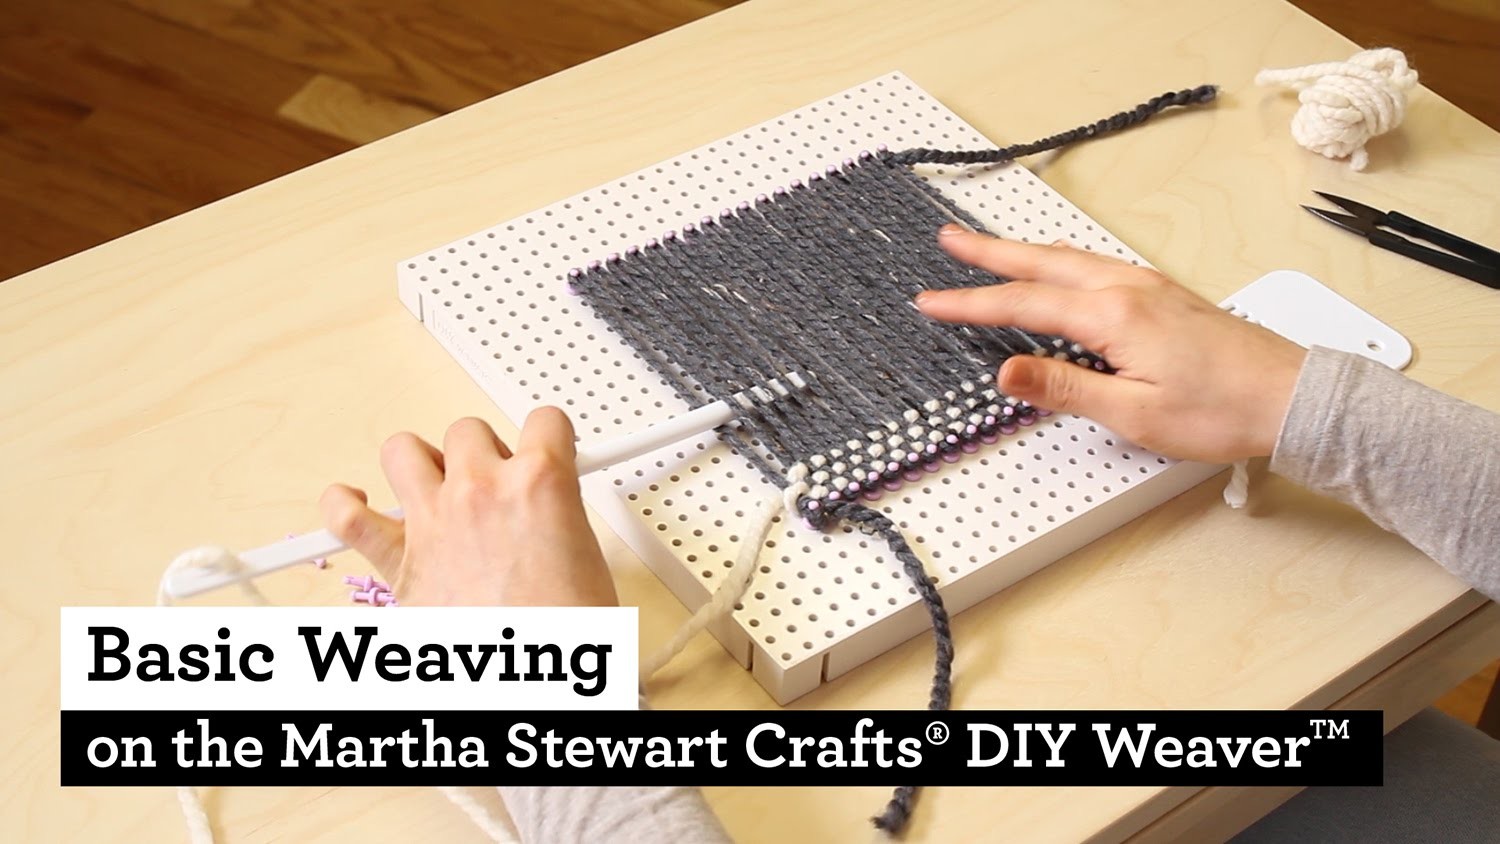 How to do Basic Weaving with the Martha Stewart Crafts® DIY Weaver(TM)